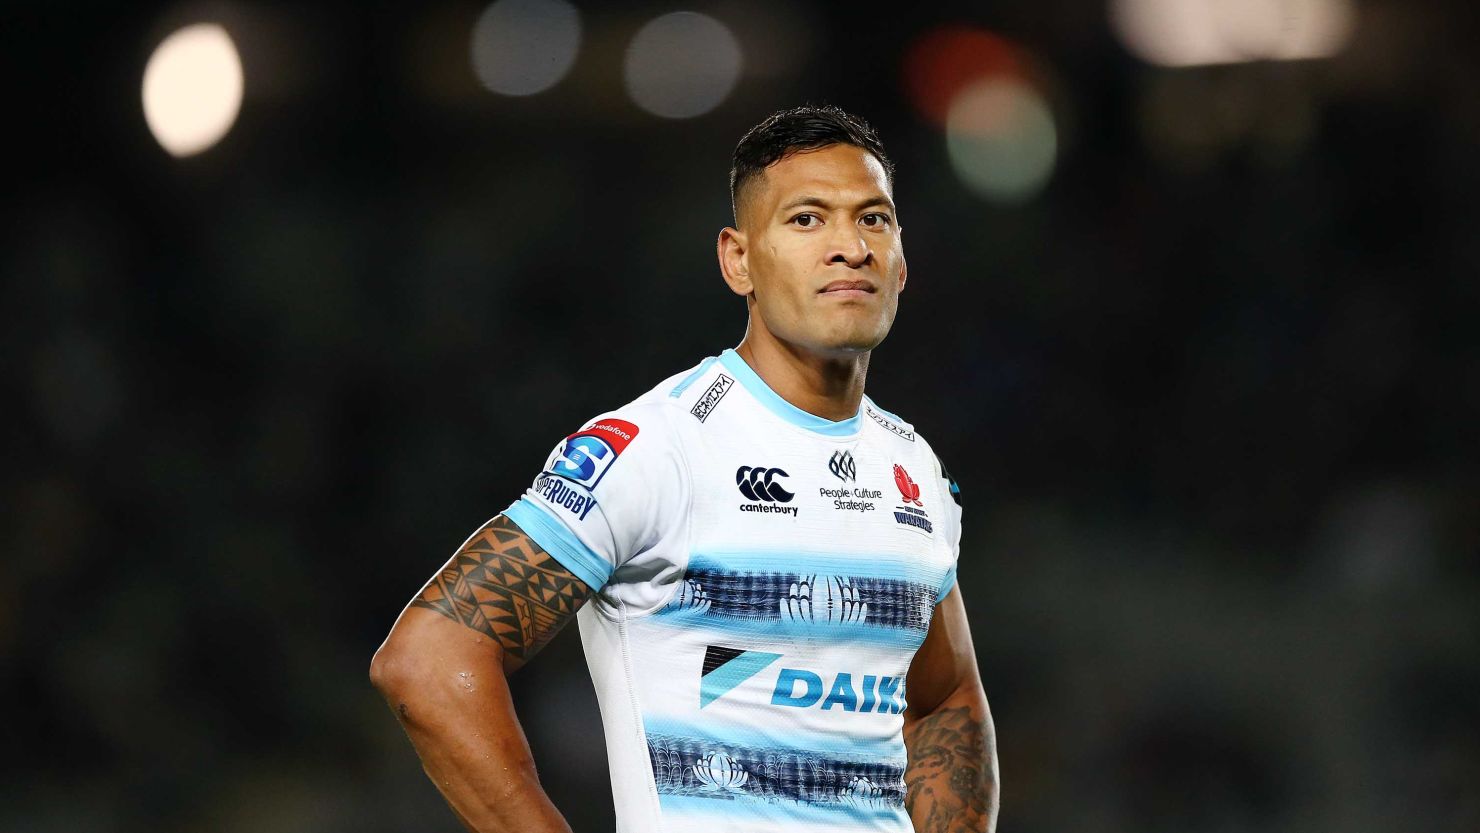 Waratahs player Folau has been criticized for posts saying gay people will go to hell.